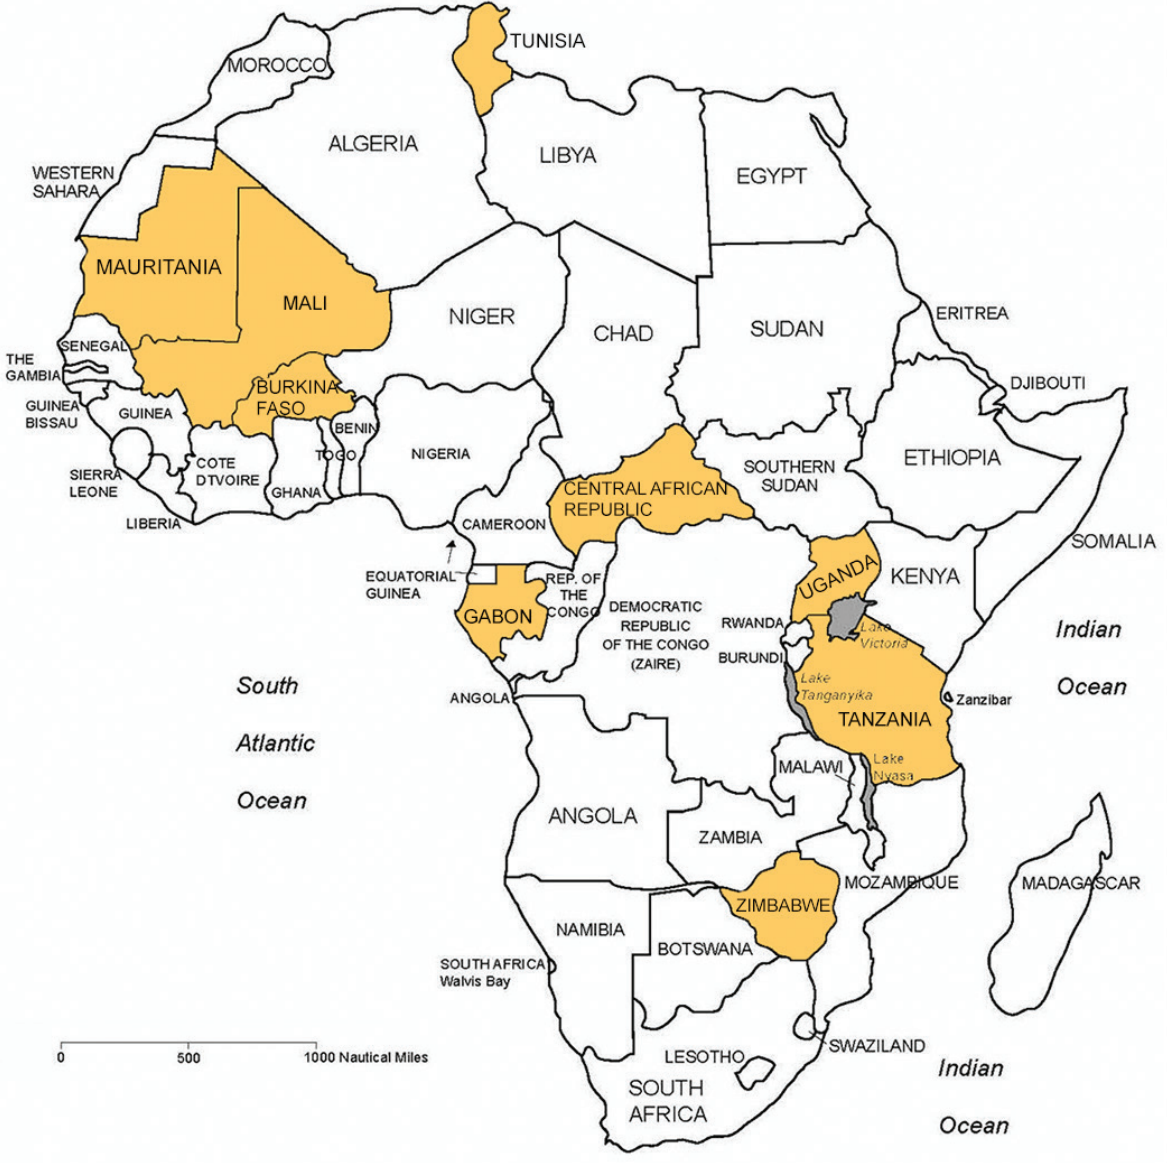 African Countries Participating in Survey